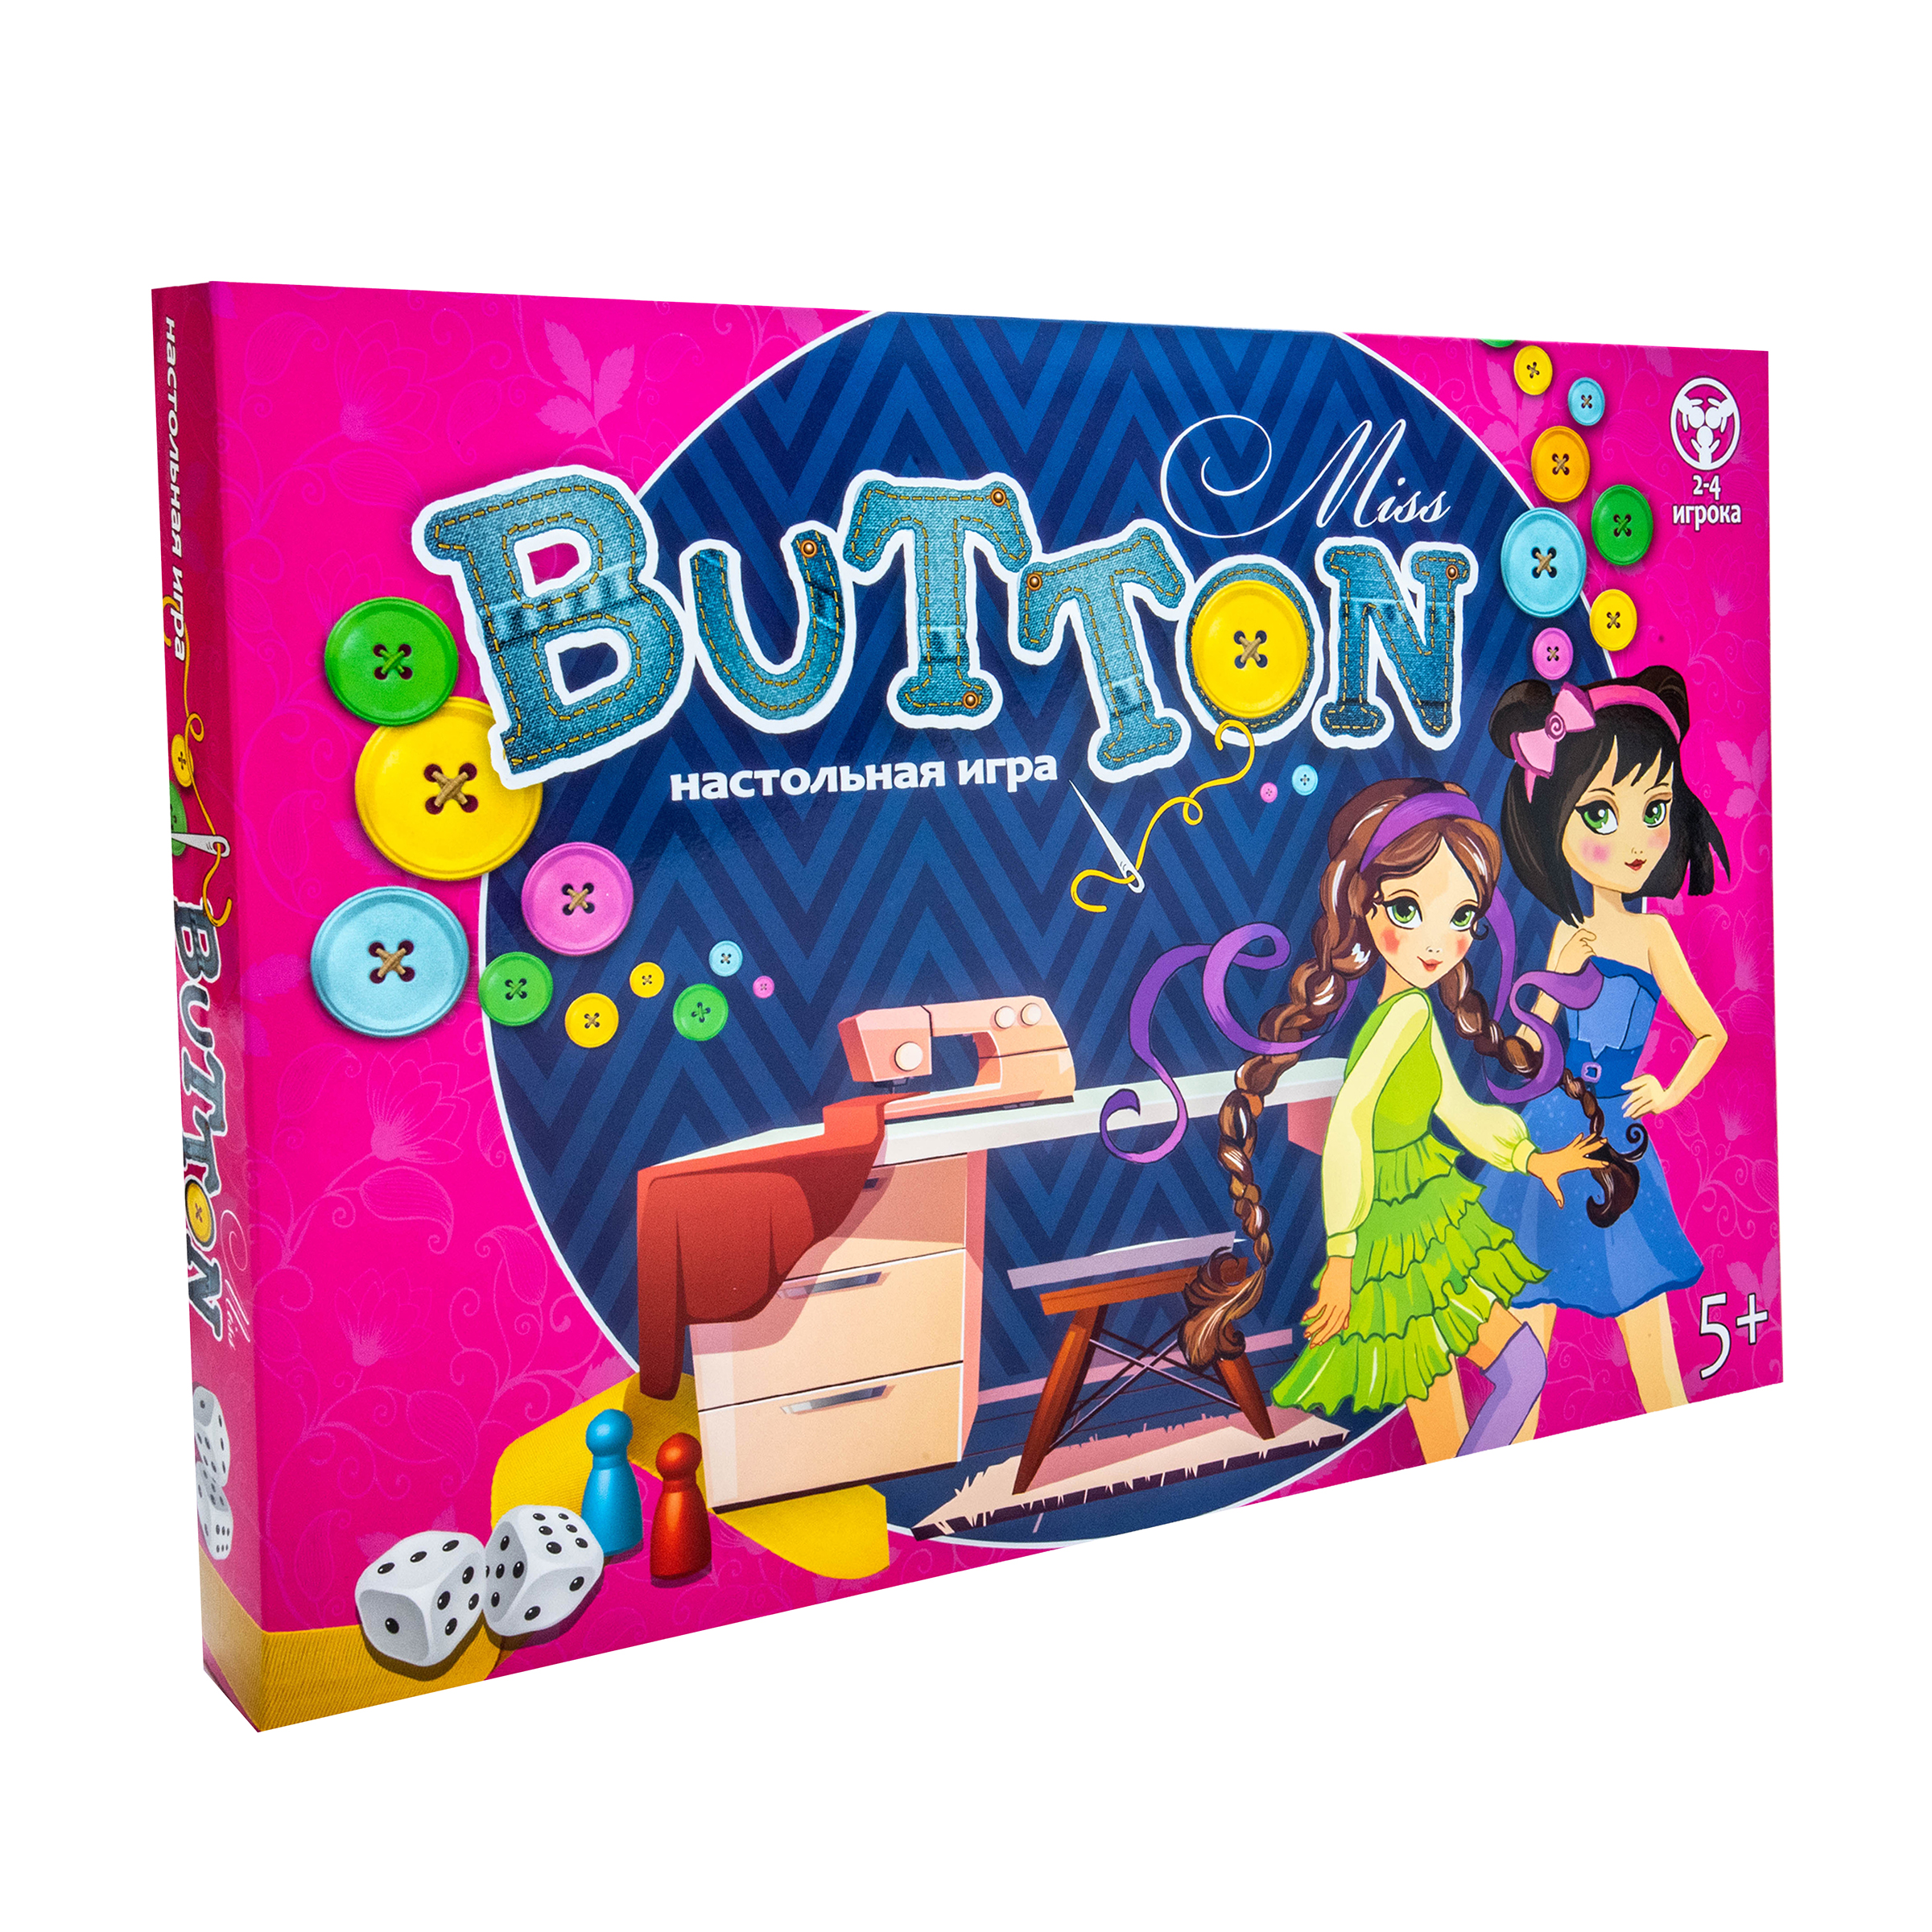 Game "Miss Button" (Russian) (30355)